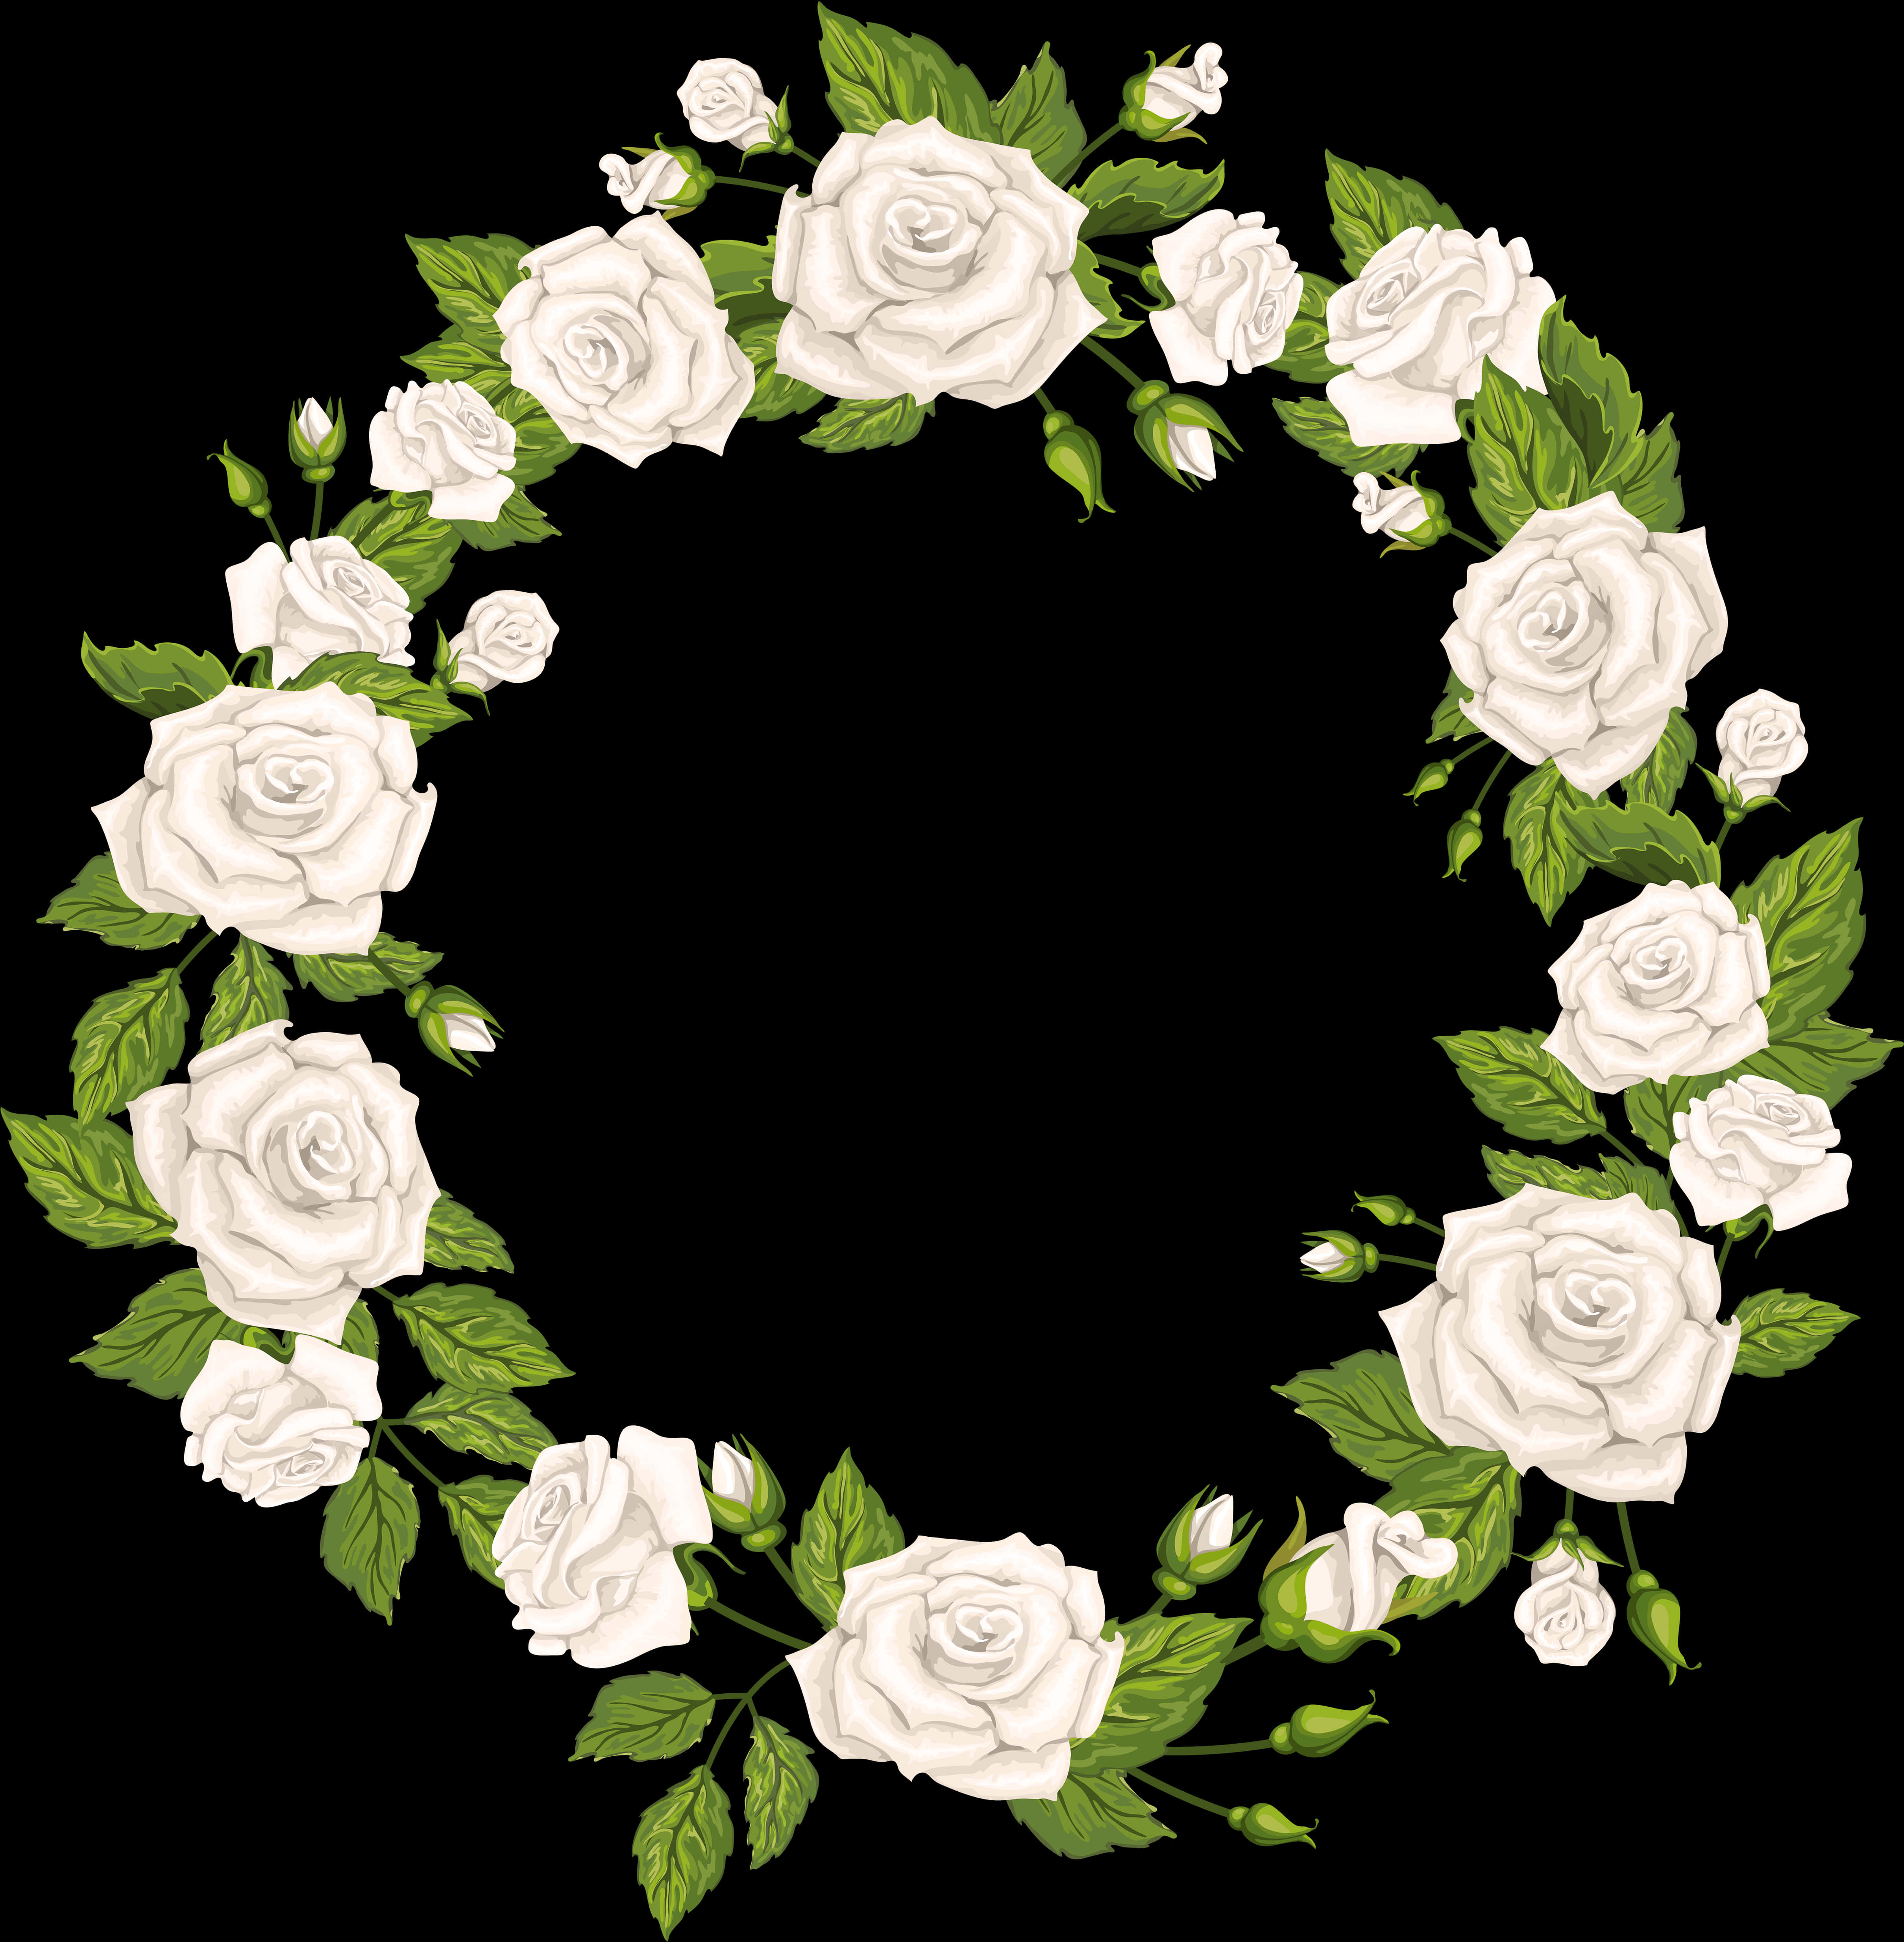 A Wreath Of White Roses And Green Leaves